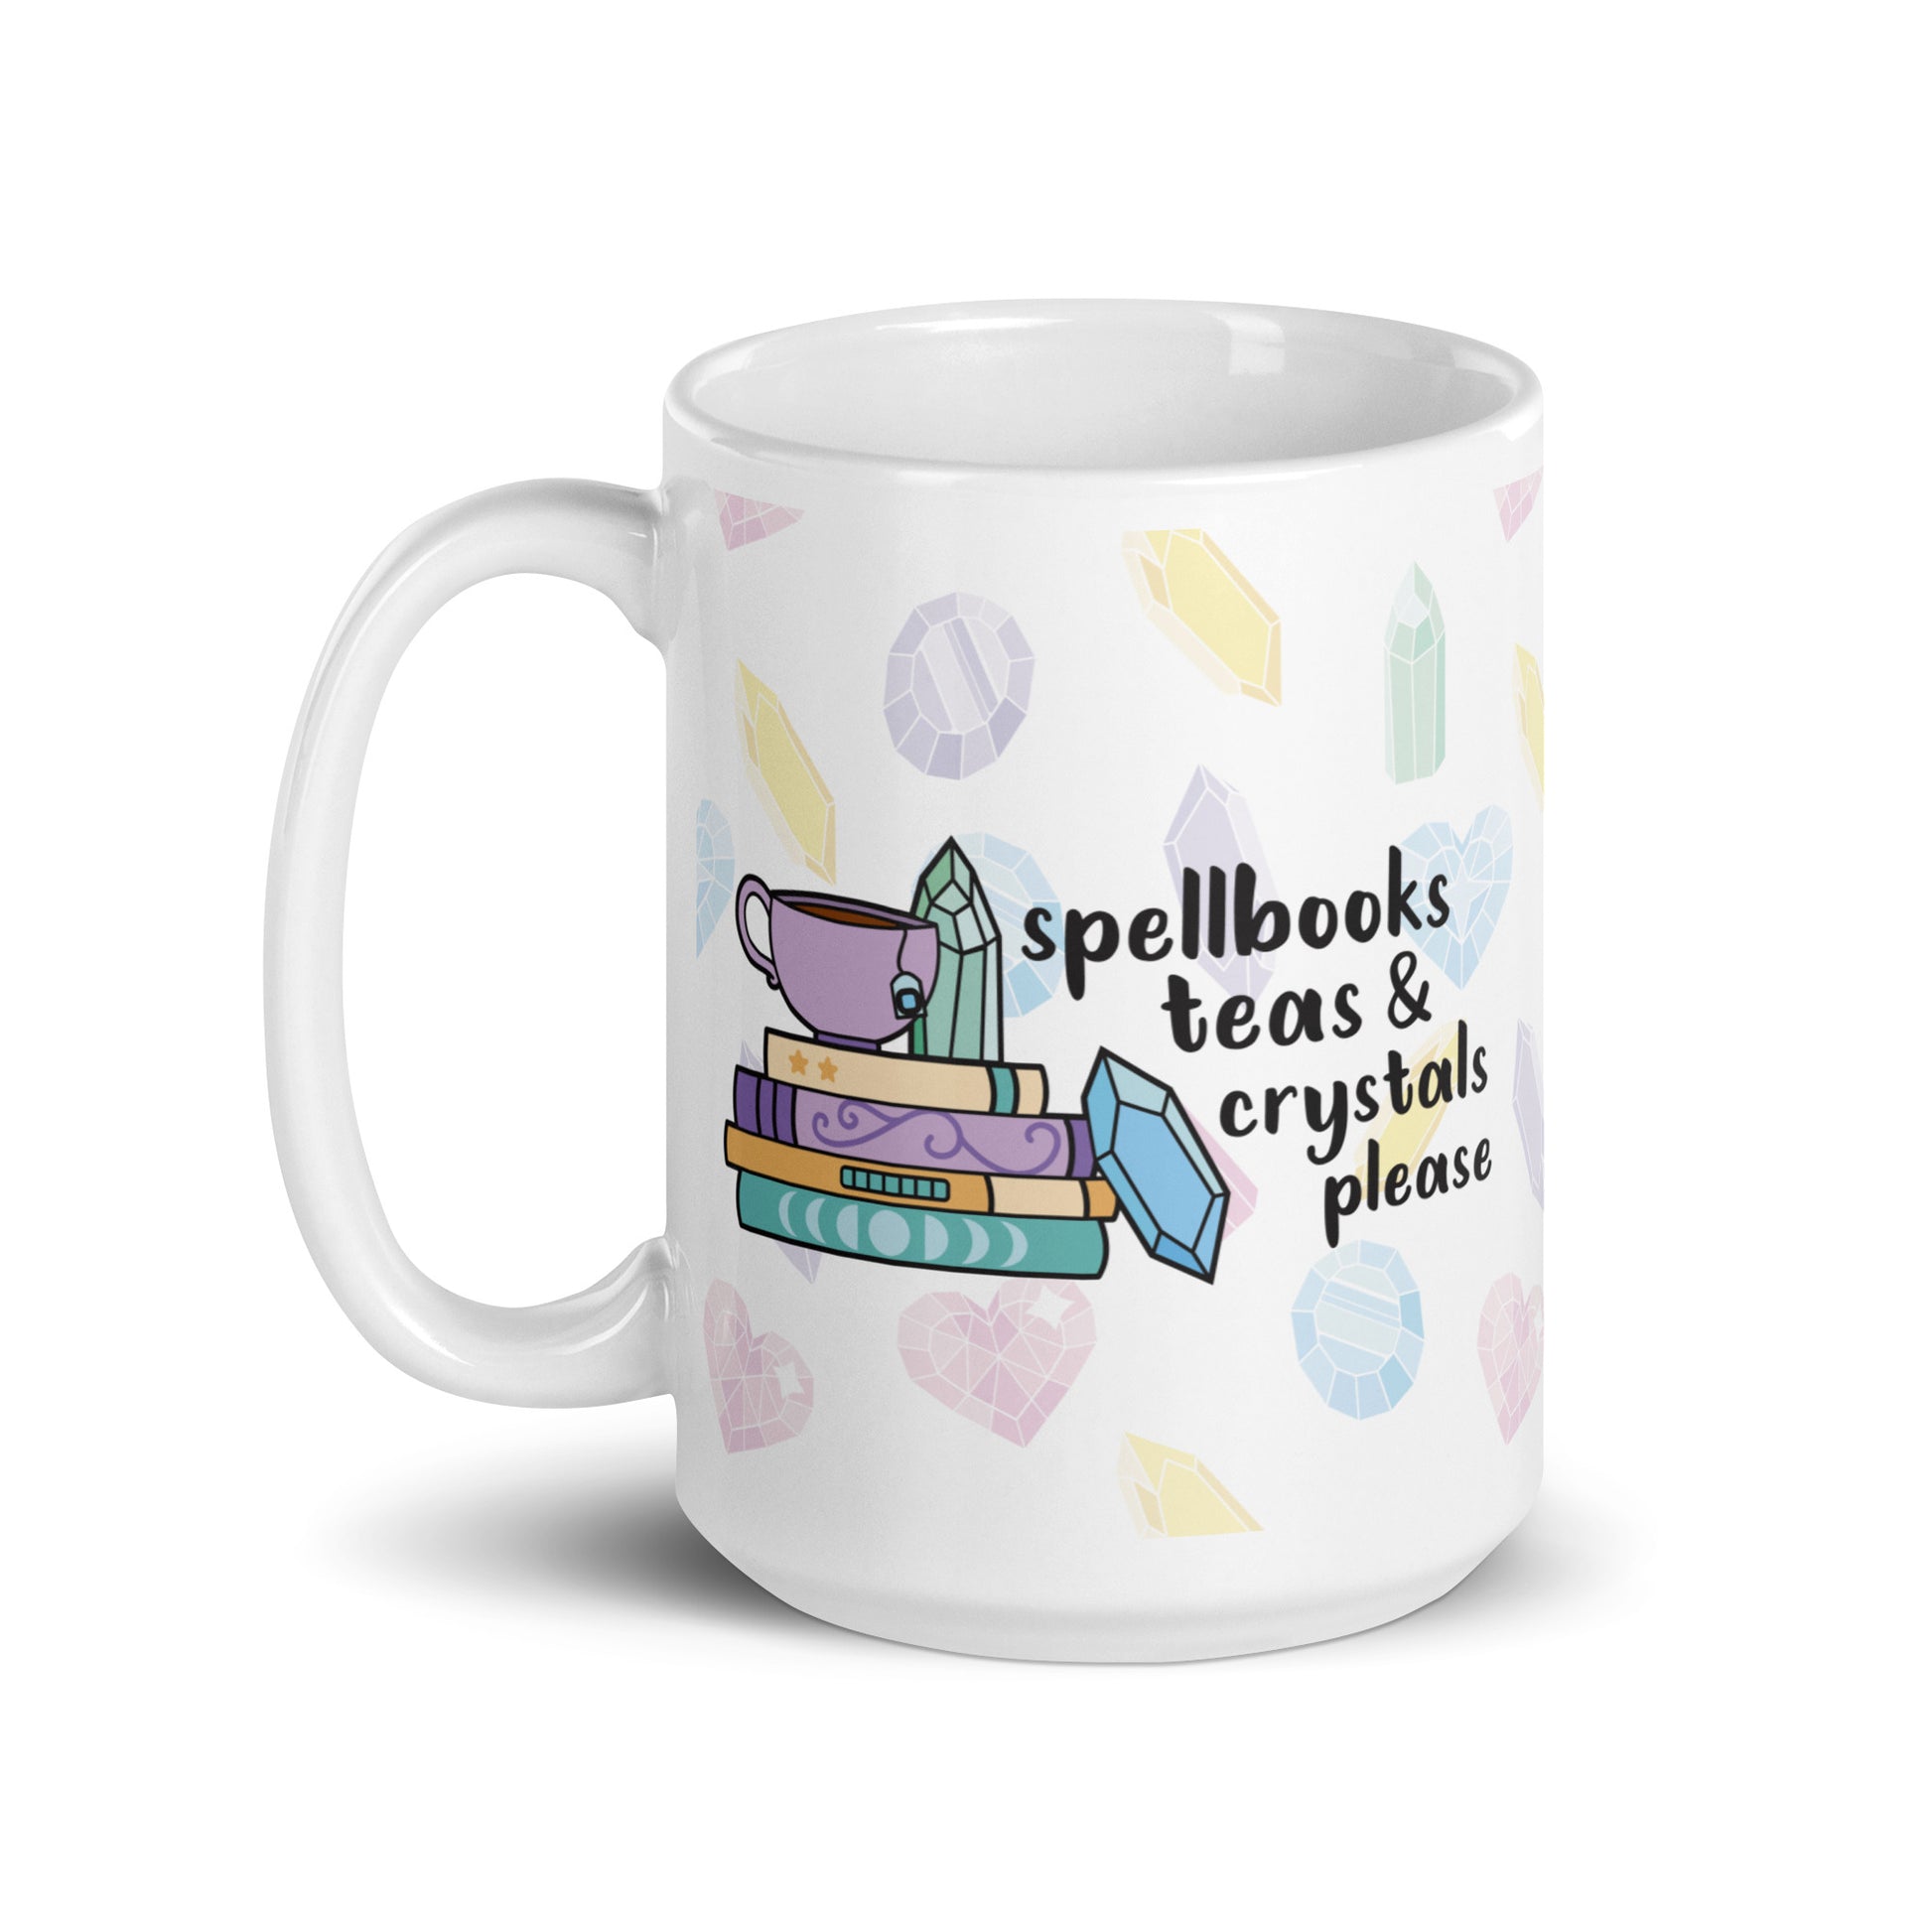 A white 15 ounce ceramic mug with a pattern of pastel crystals. In the center of the mug is an illustration of several books and crystals and a teacup. Text along side the image reads "Spellbooks, teas, & crystals please"